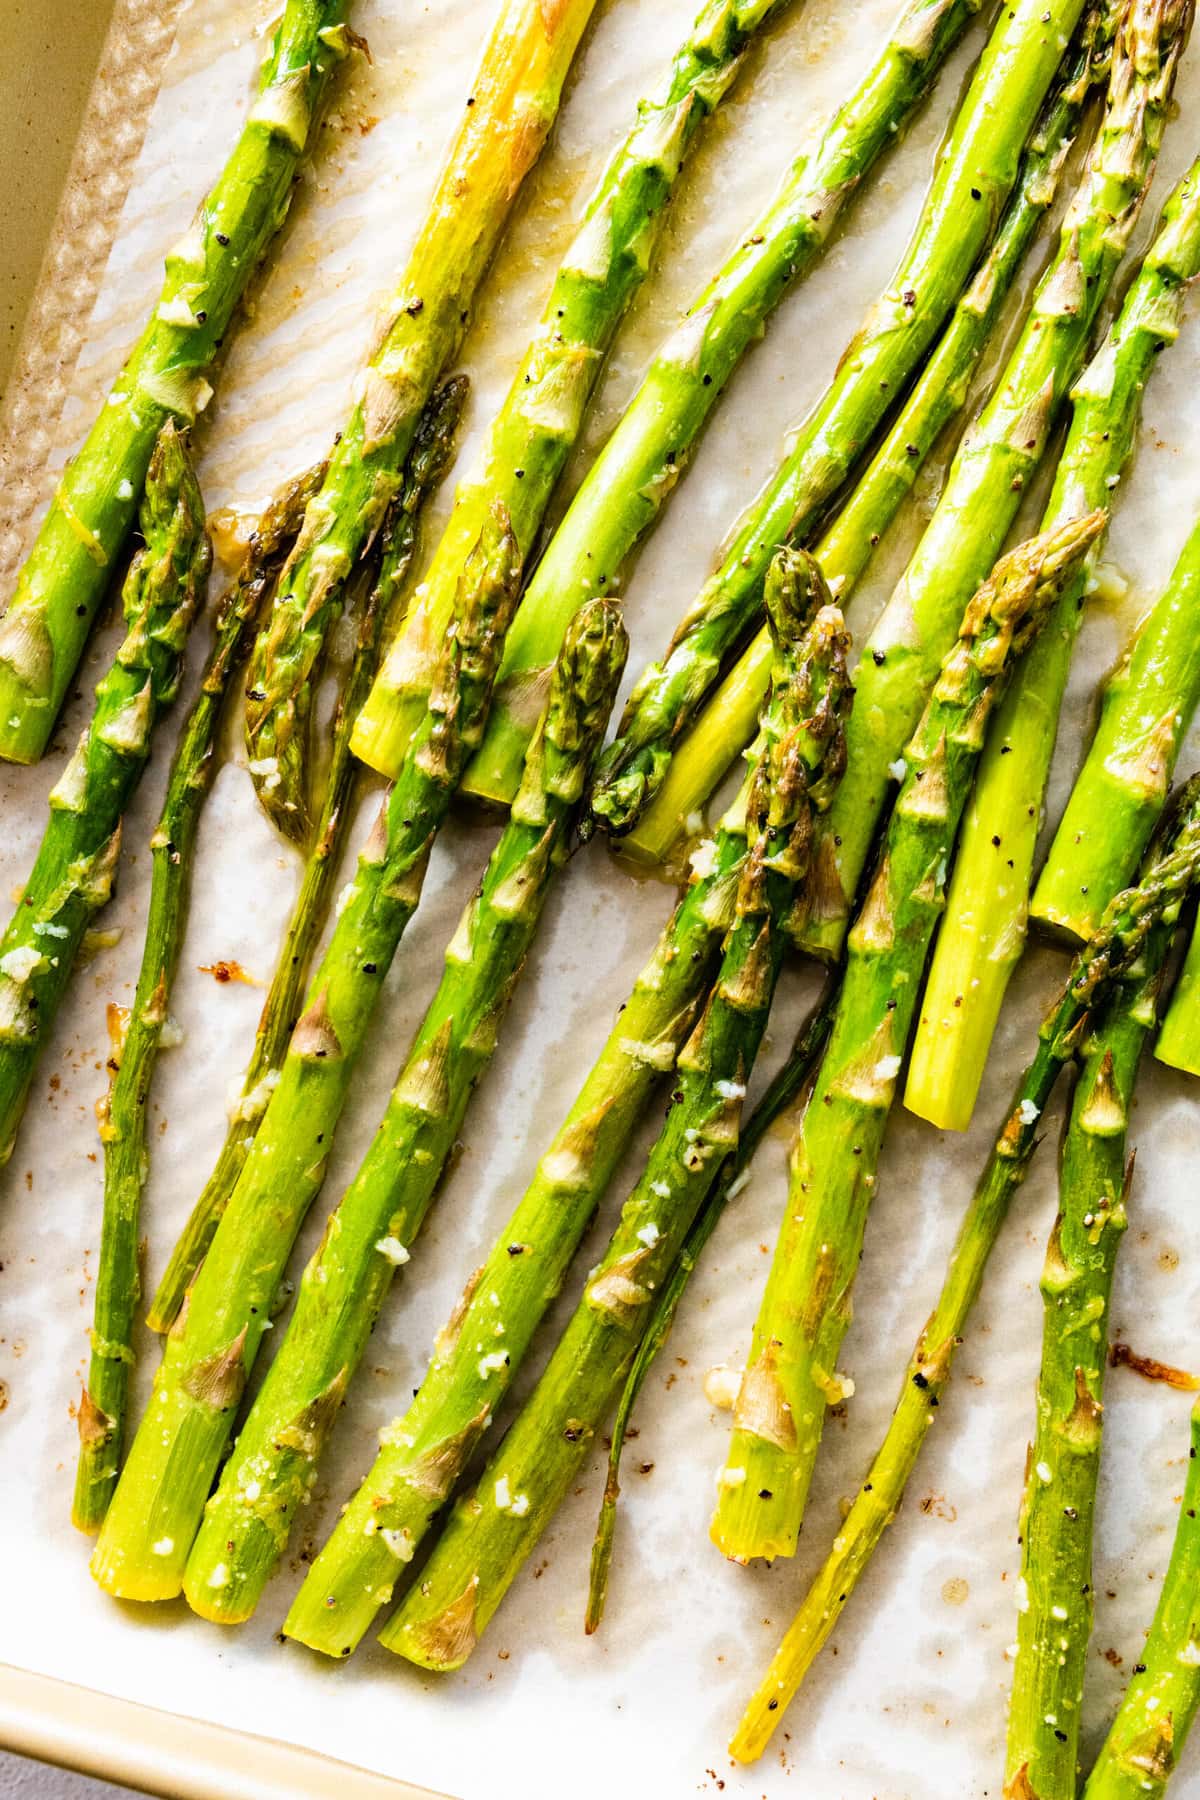 how to make Easy best oven-roasted asparagus recipe (step-by-step instructions)- placing the asparagus on a baking sheet to cook.